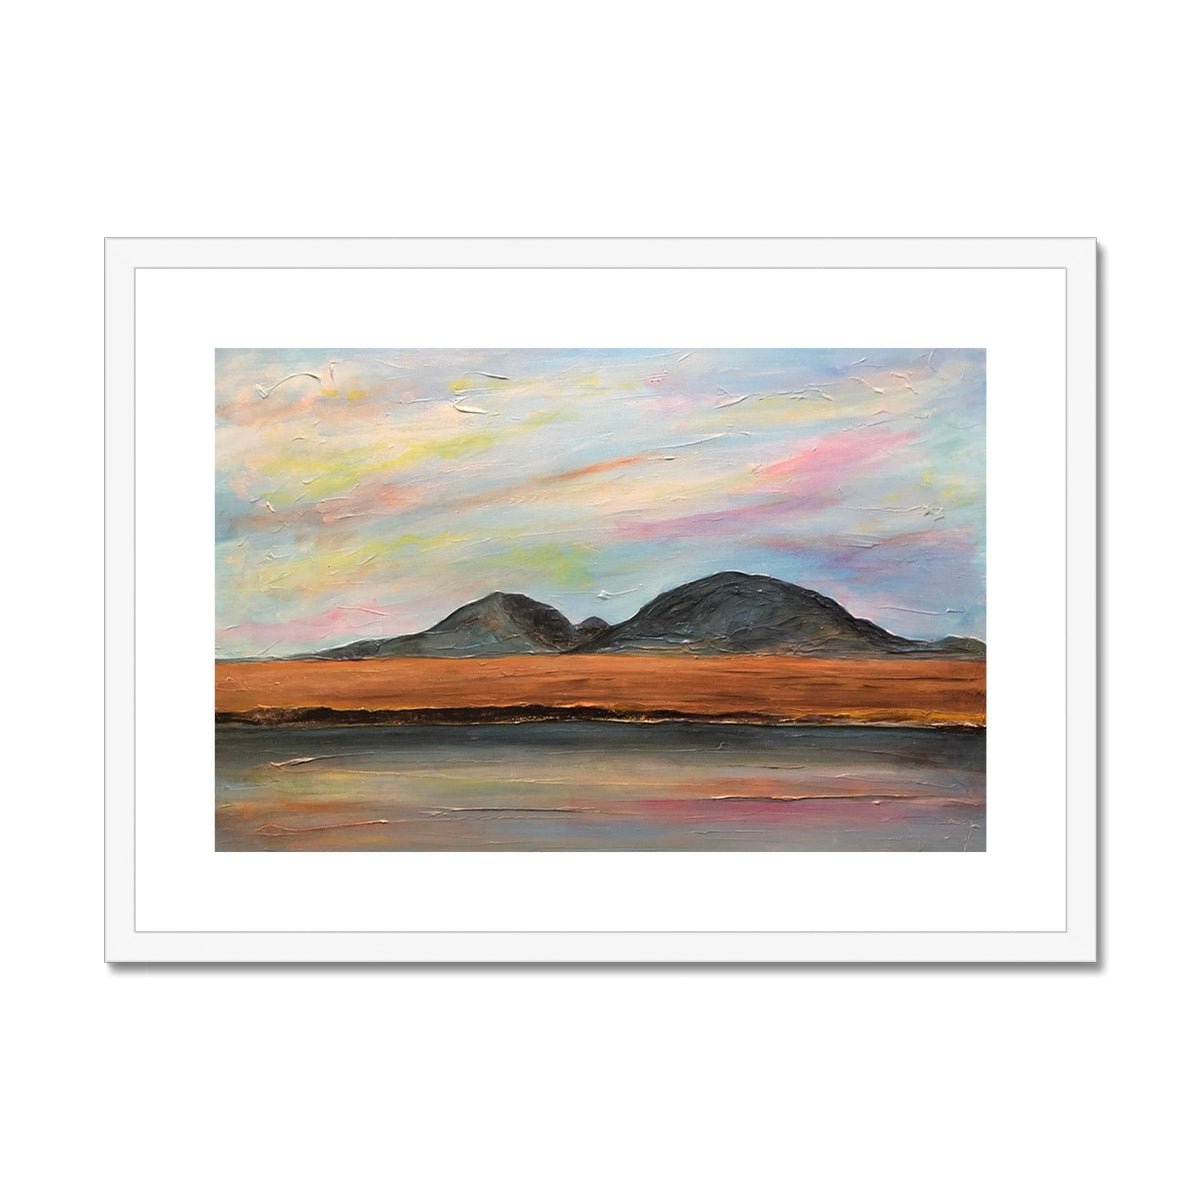 Jura Dawn Painting | Framed & Mounted Prints From Scotland-Framed & Mounted Prints-Hebridean Islands Art Gallery-A2 Landscape-White Frame-Paintings, Prints, Homeware, Art Gifts From Scotland By Scottish Artist Kevin Hunter